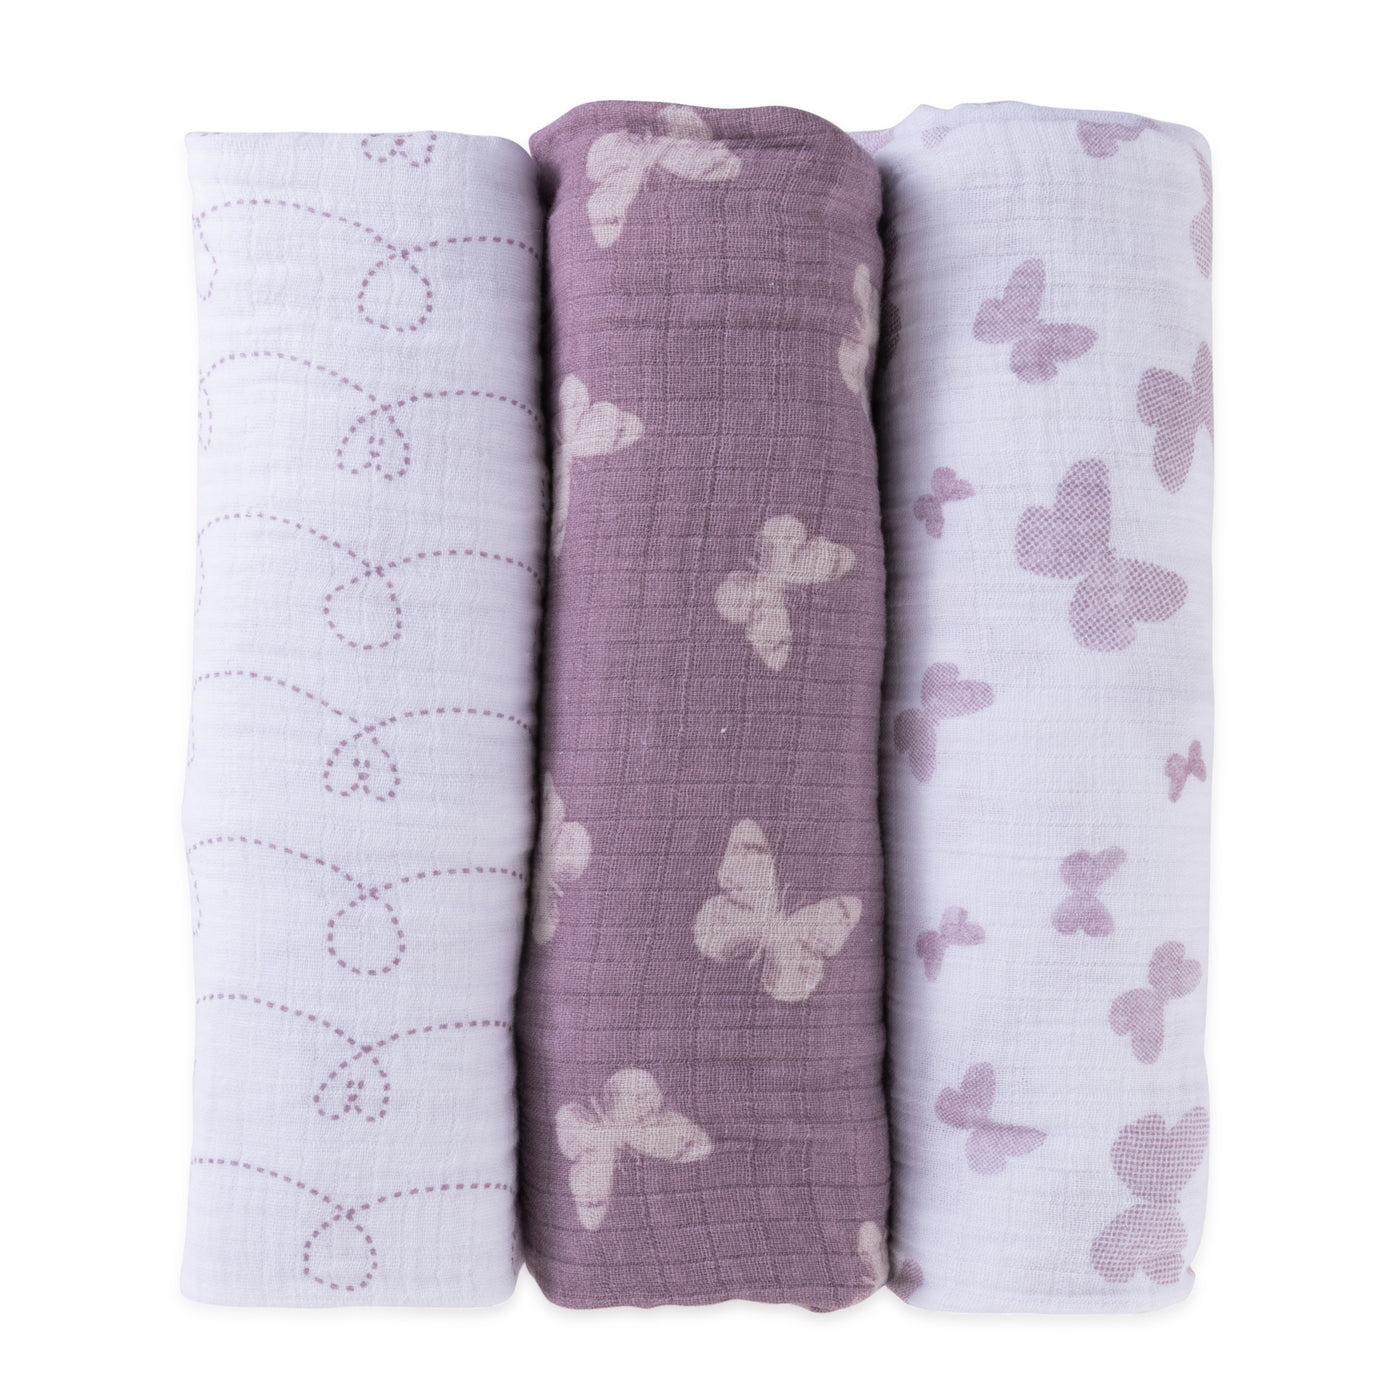 Ely's & Co. Muslin Swaddle Three Pack - Lavender Butterfly Collection